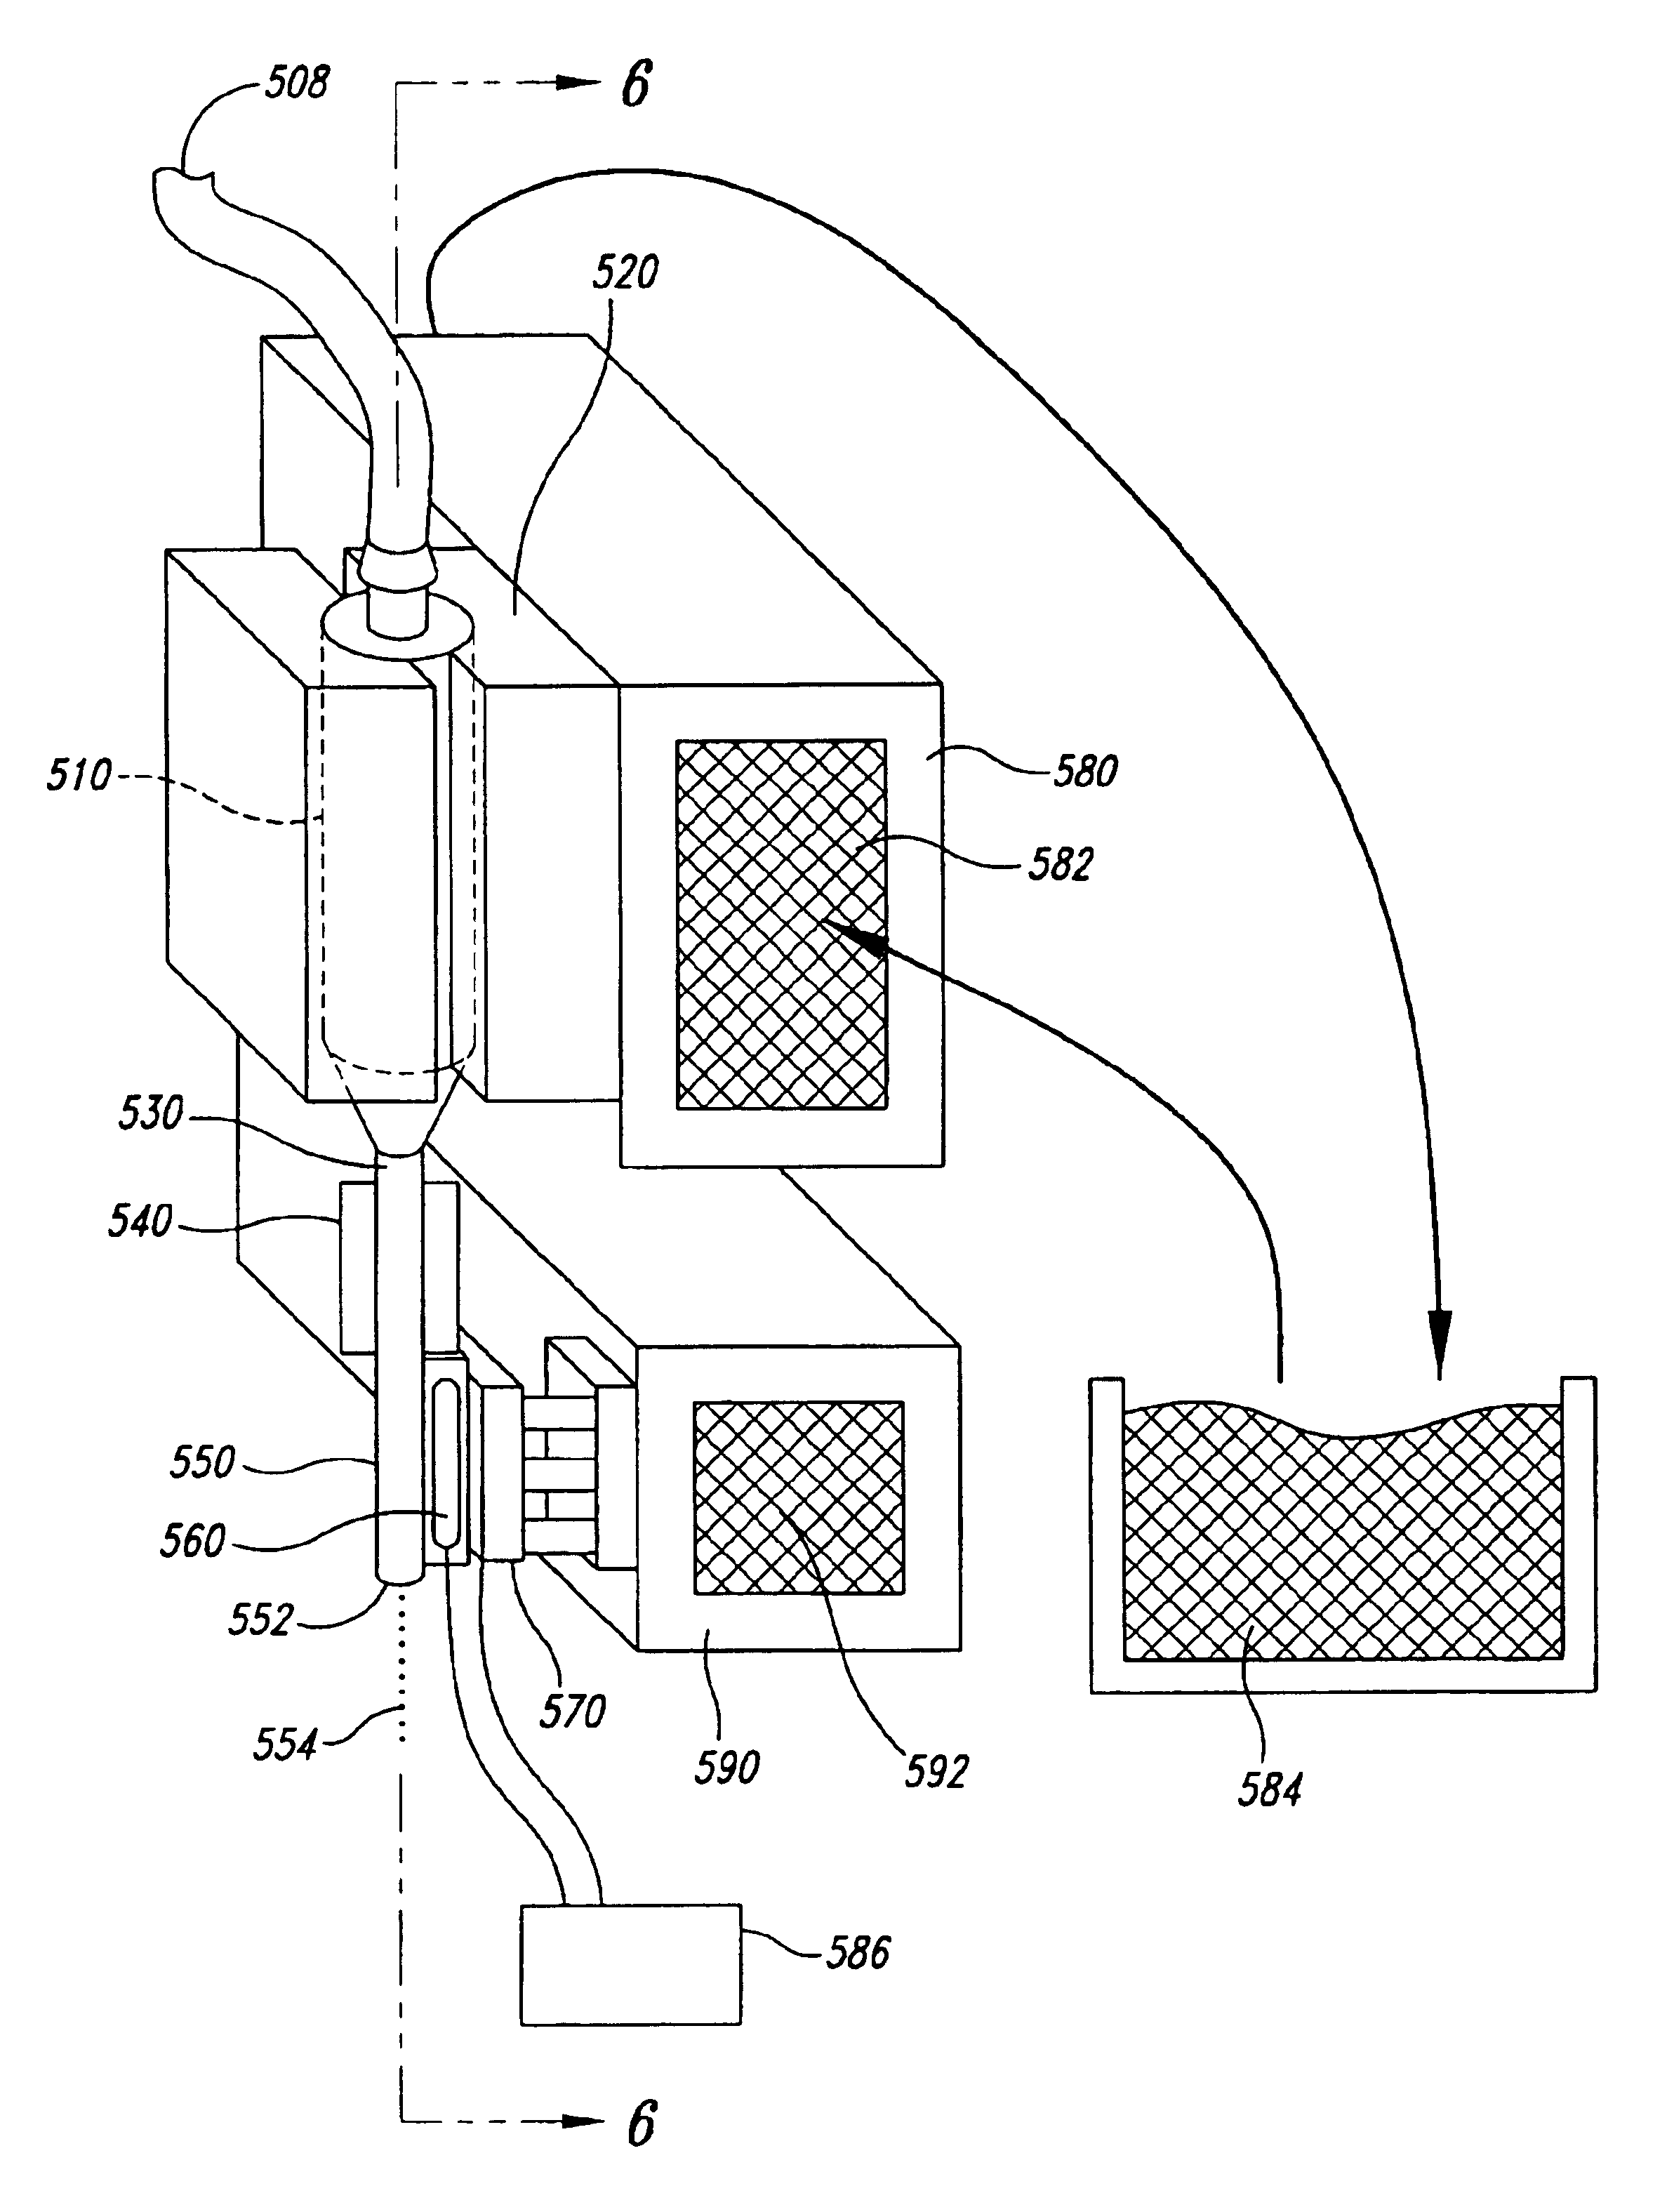 Method and system for controlling the temperature of a dispensed liquid